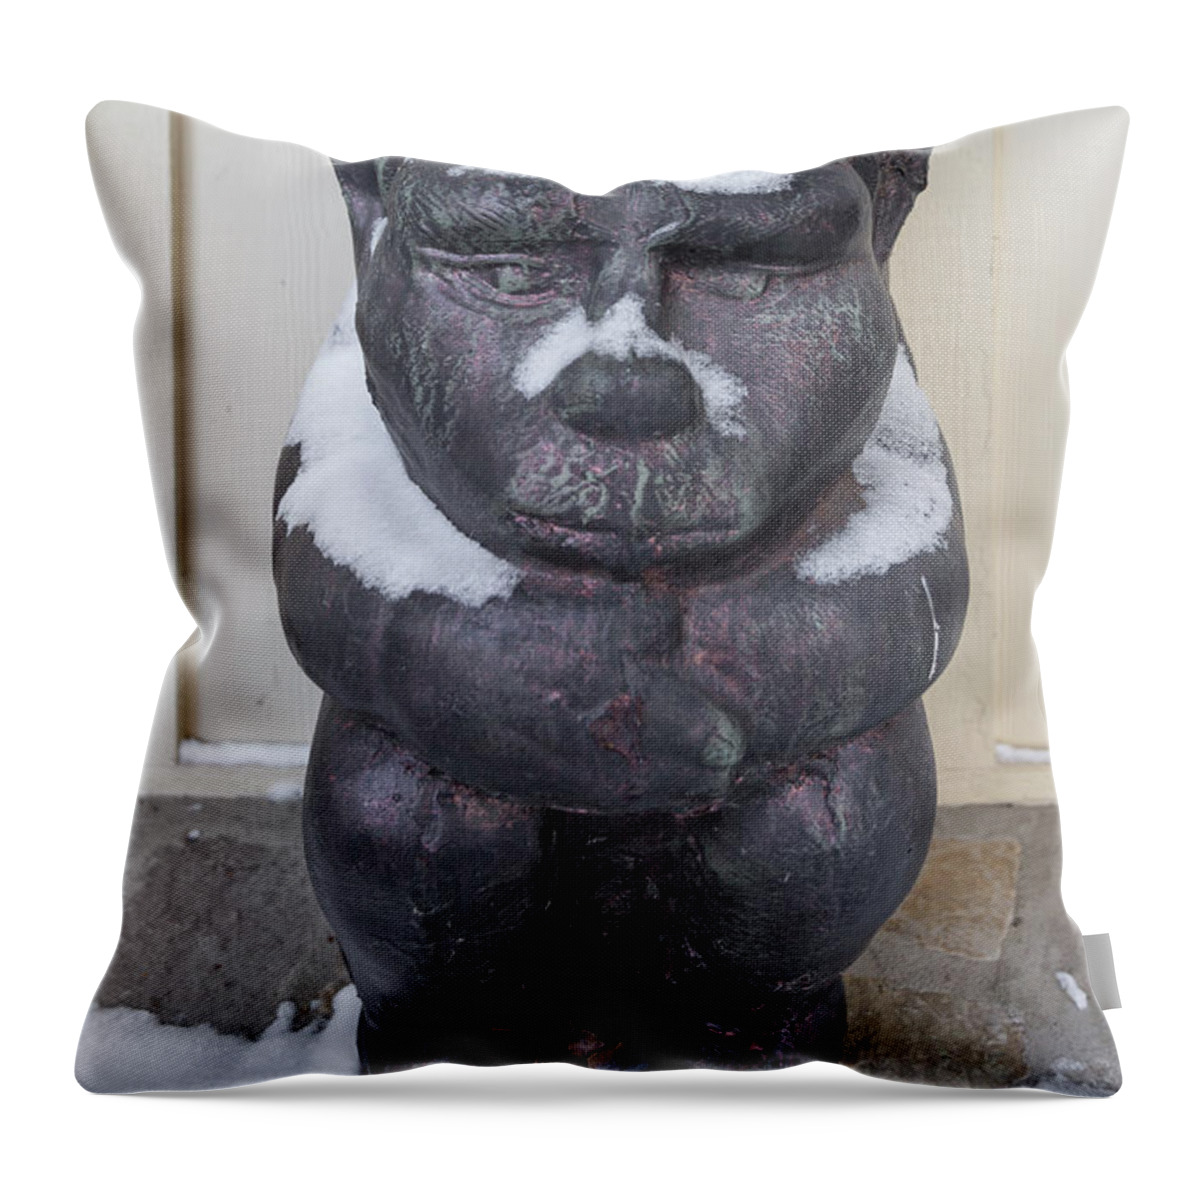 Chimera Throw Pillow featuring the photograph Snow Covered Chimera by D K Wall